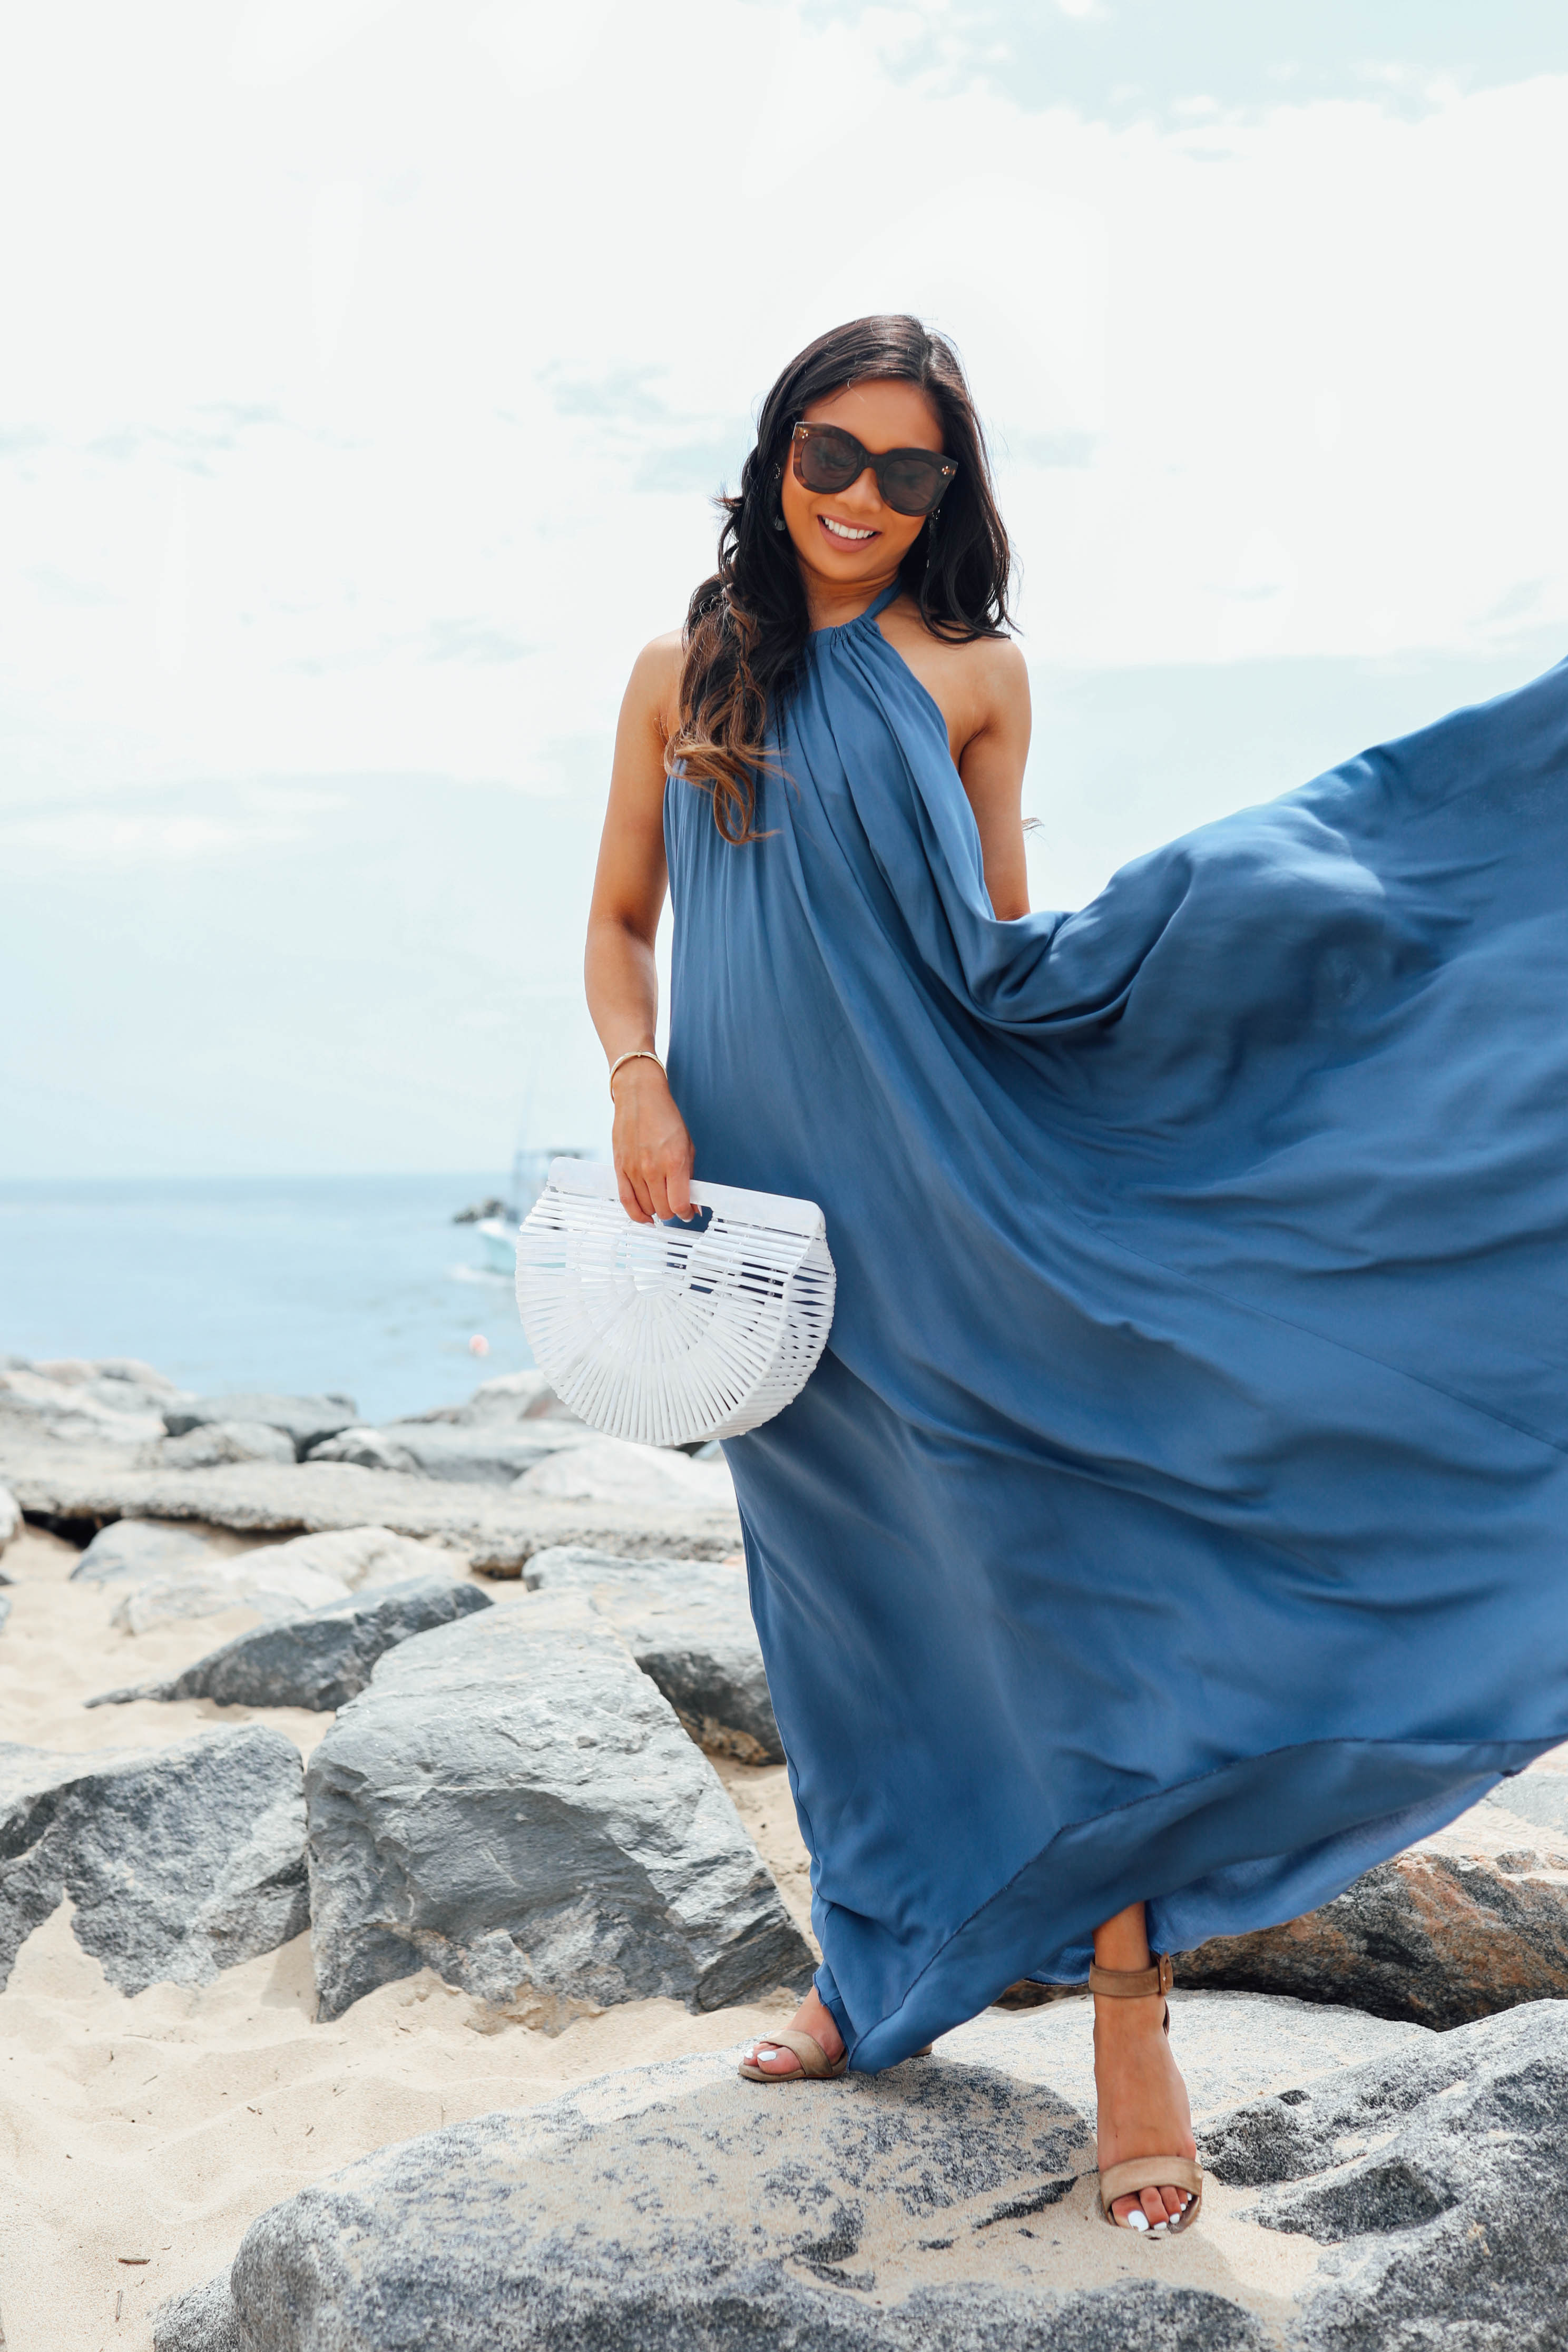 Hoang-Kim of Color & Chic wears an indigo maxi dress with pockets